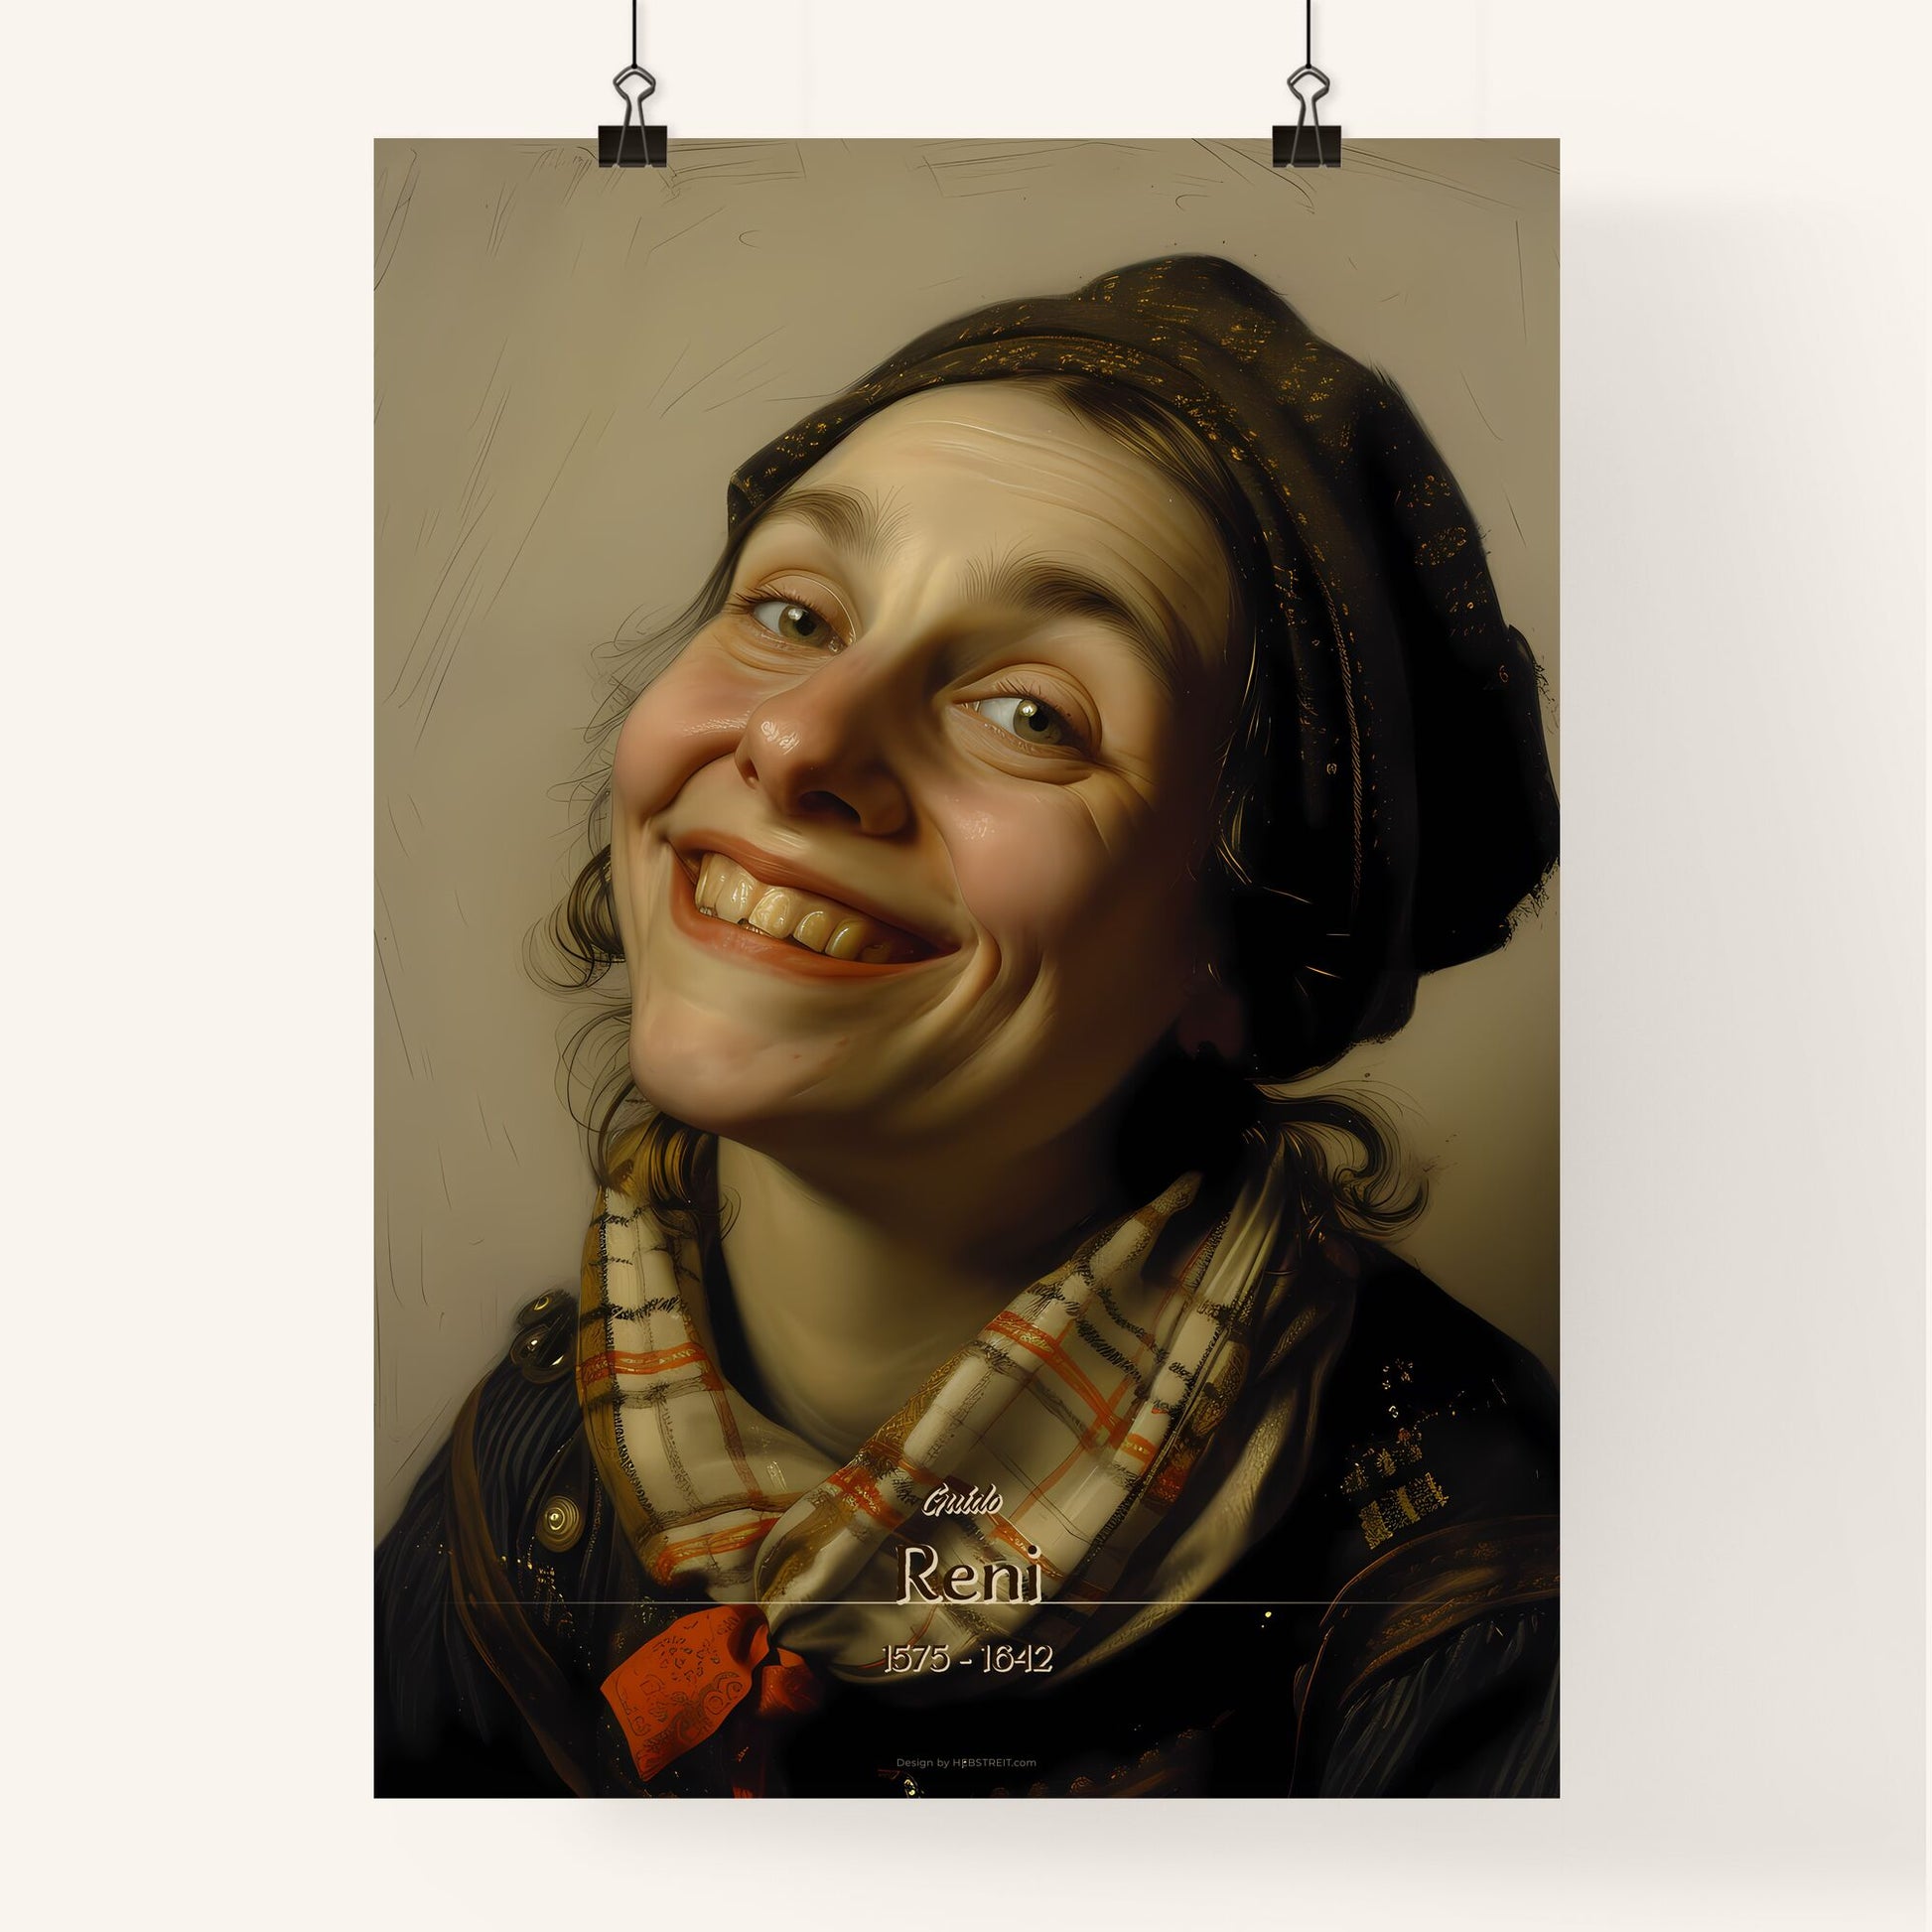 Guido, Reni, 1575 - 1642, A Poster of a woman smiling with a scarf and a hat Default Title